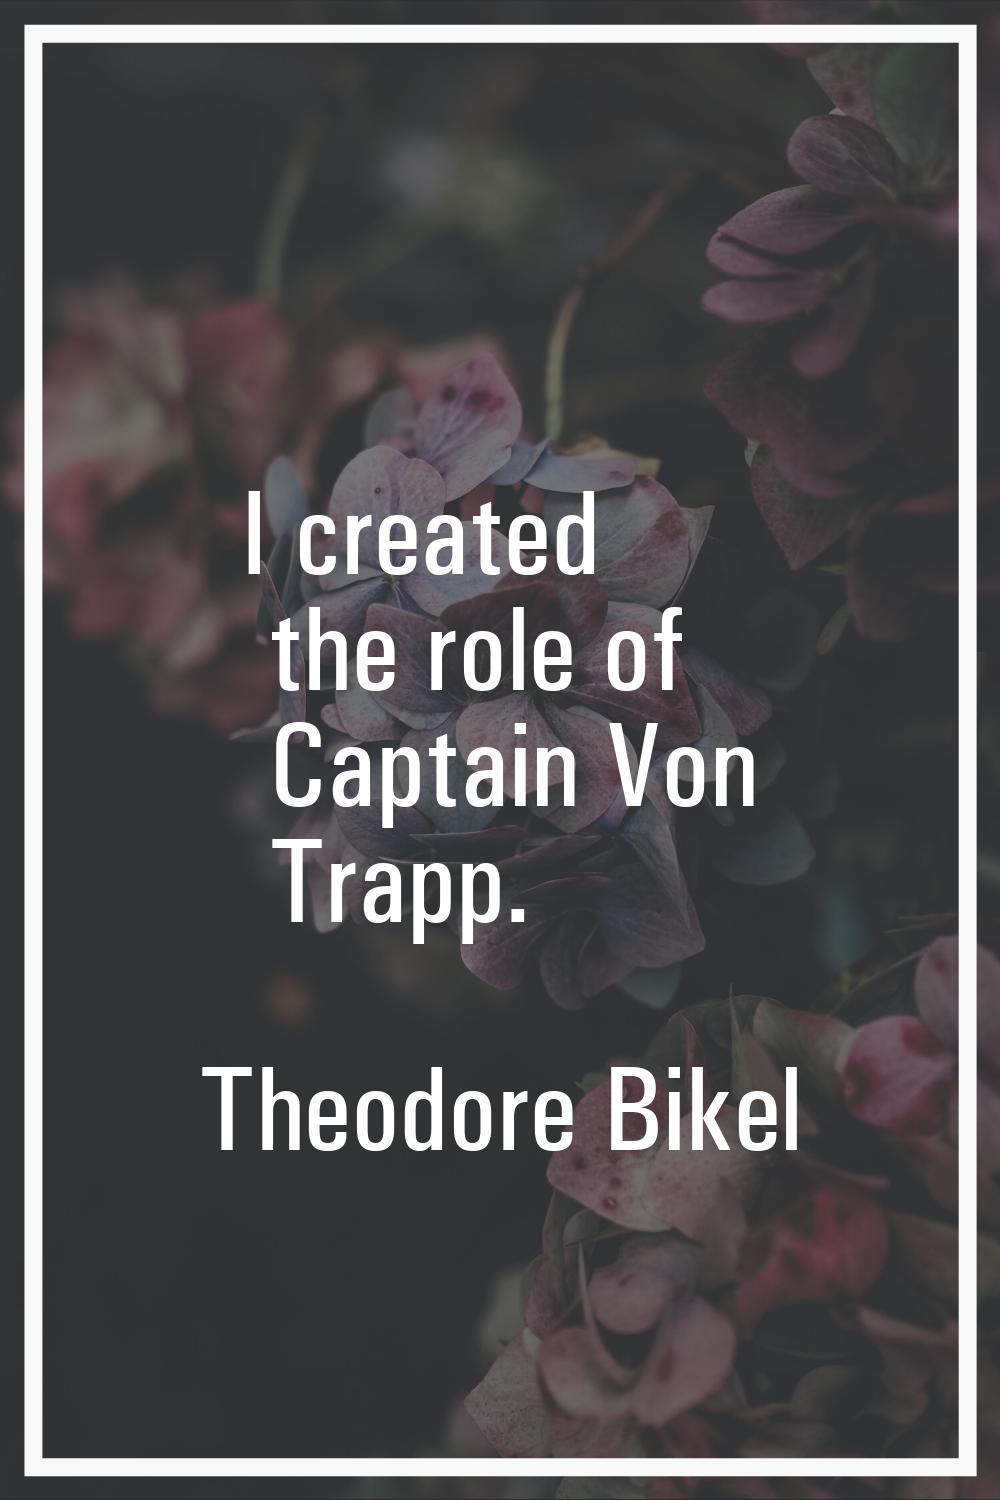 I created the role of Captain Von Trapp.